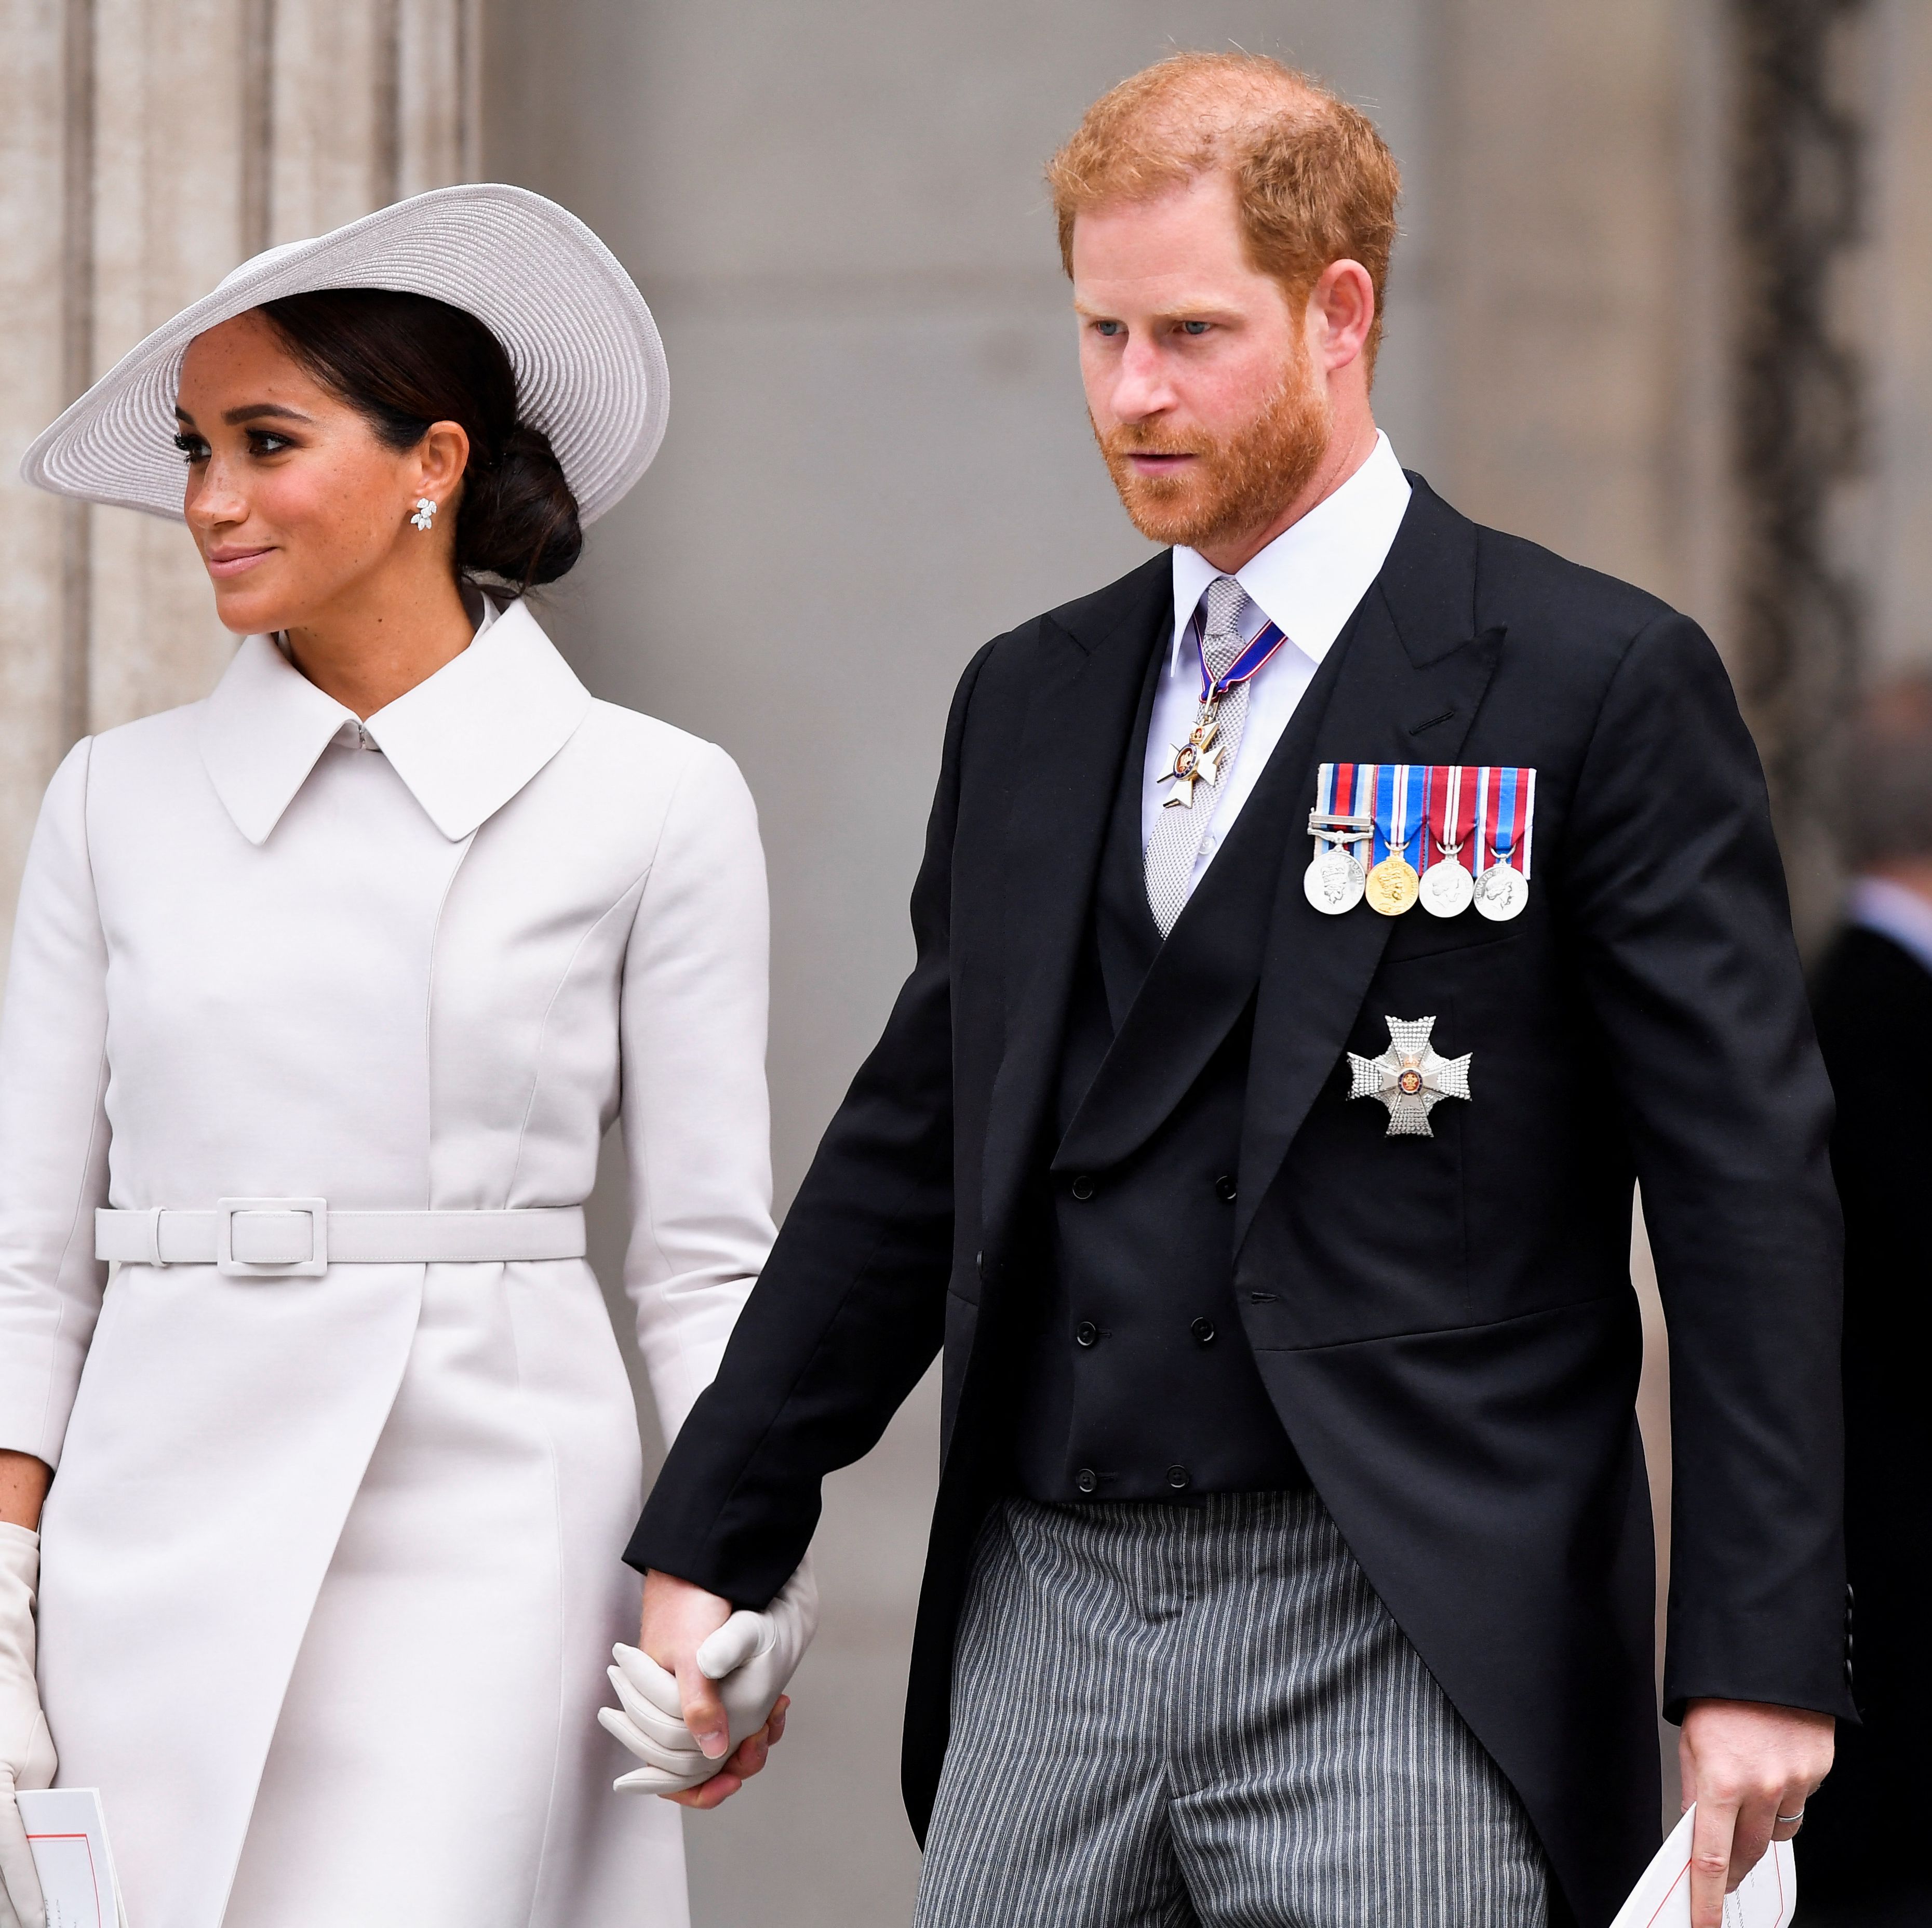 The coronation is taking place on another big day for the couple—but a royal expert swears it's not a snub.